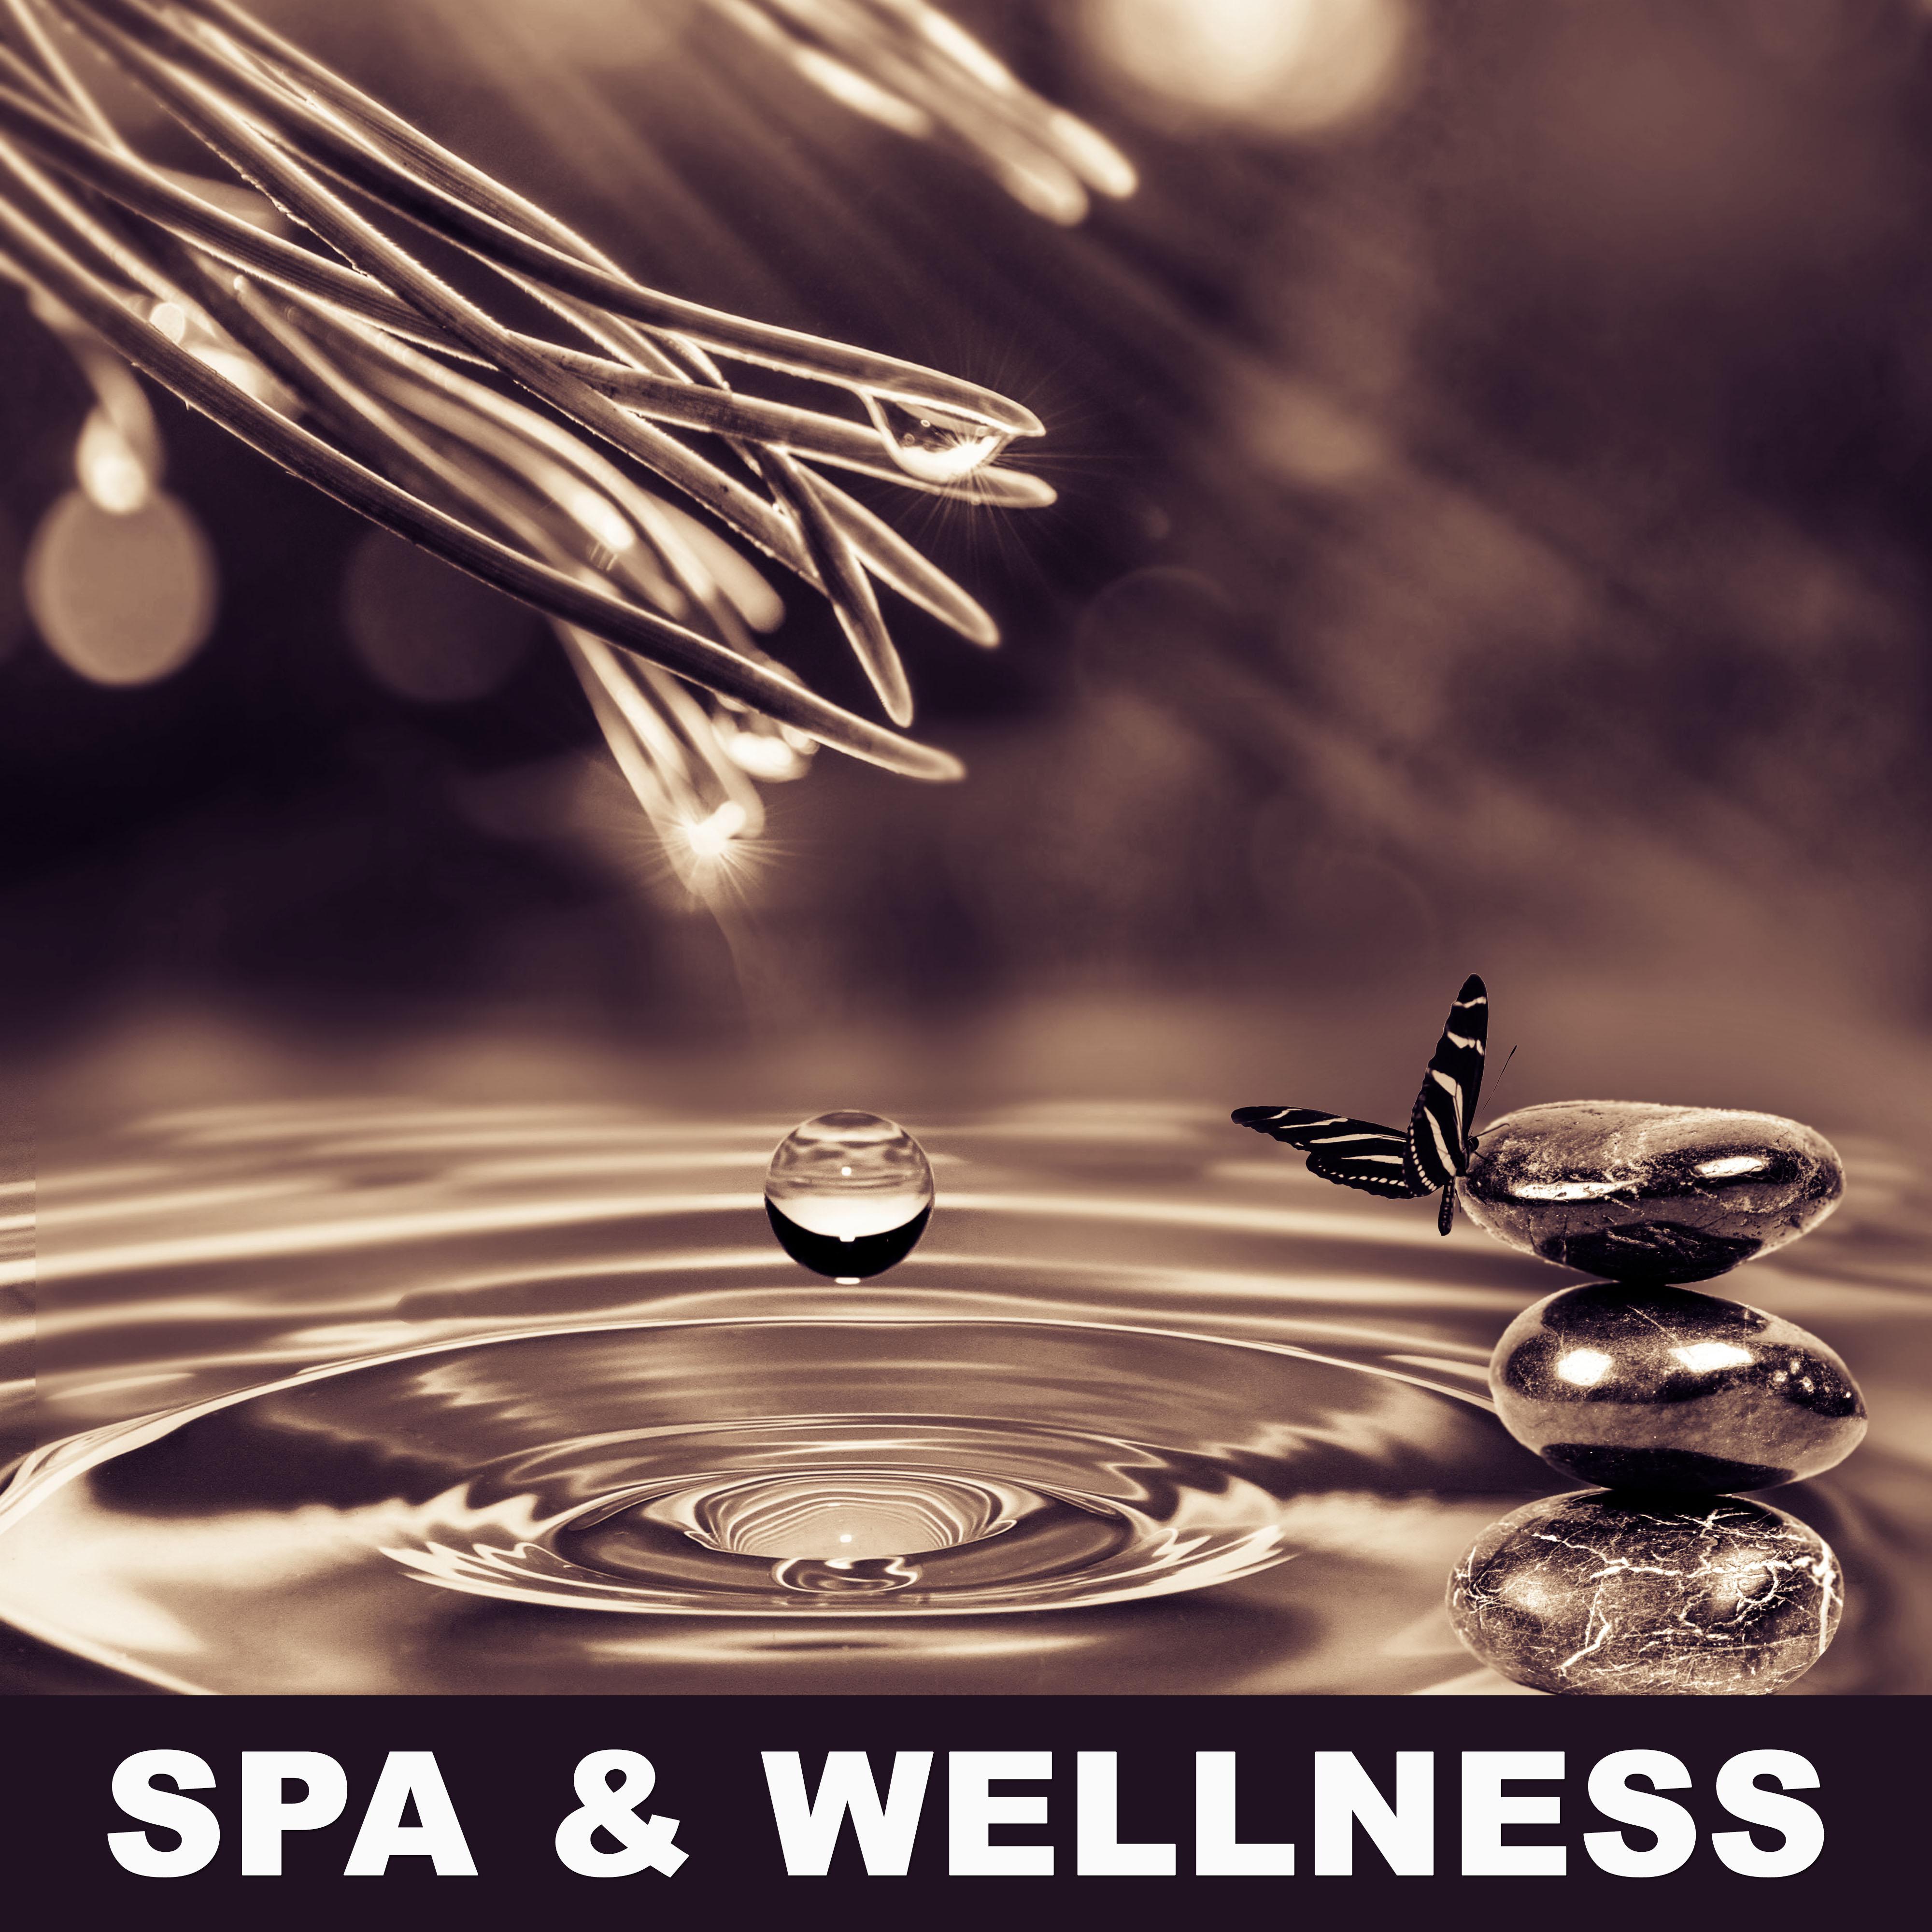 Spa  Wellness  Gentle  Music for Massage, Hot Stone Massage, Classic Massage, Full of Peacefull Nature Sounds for Deep Relax, Stress Relief After Heavy Day